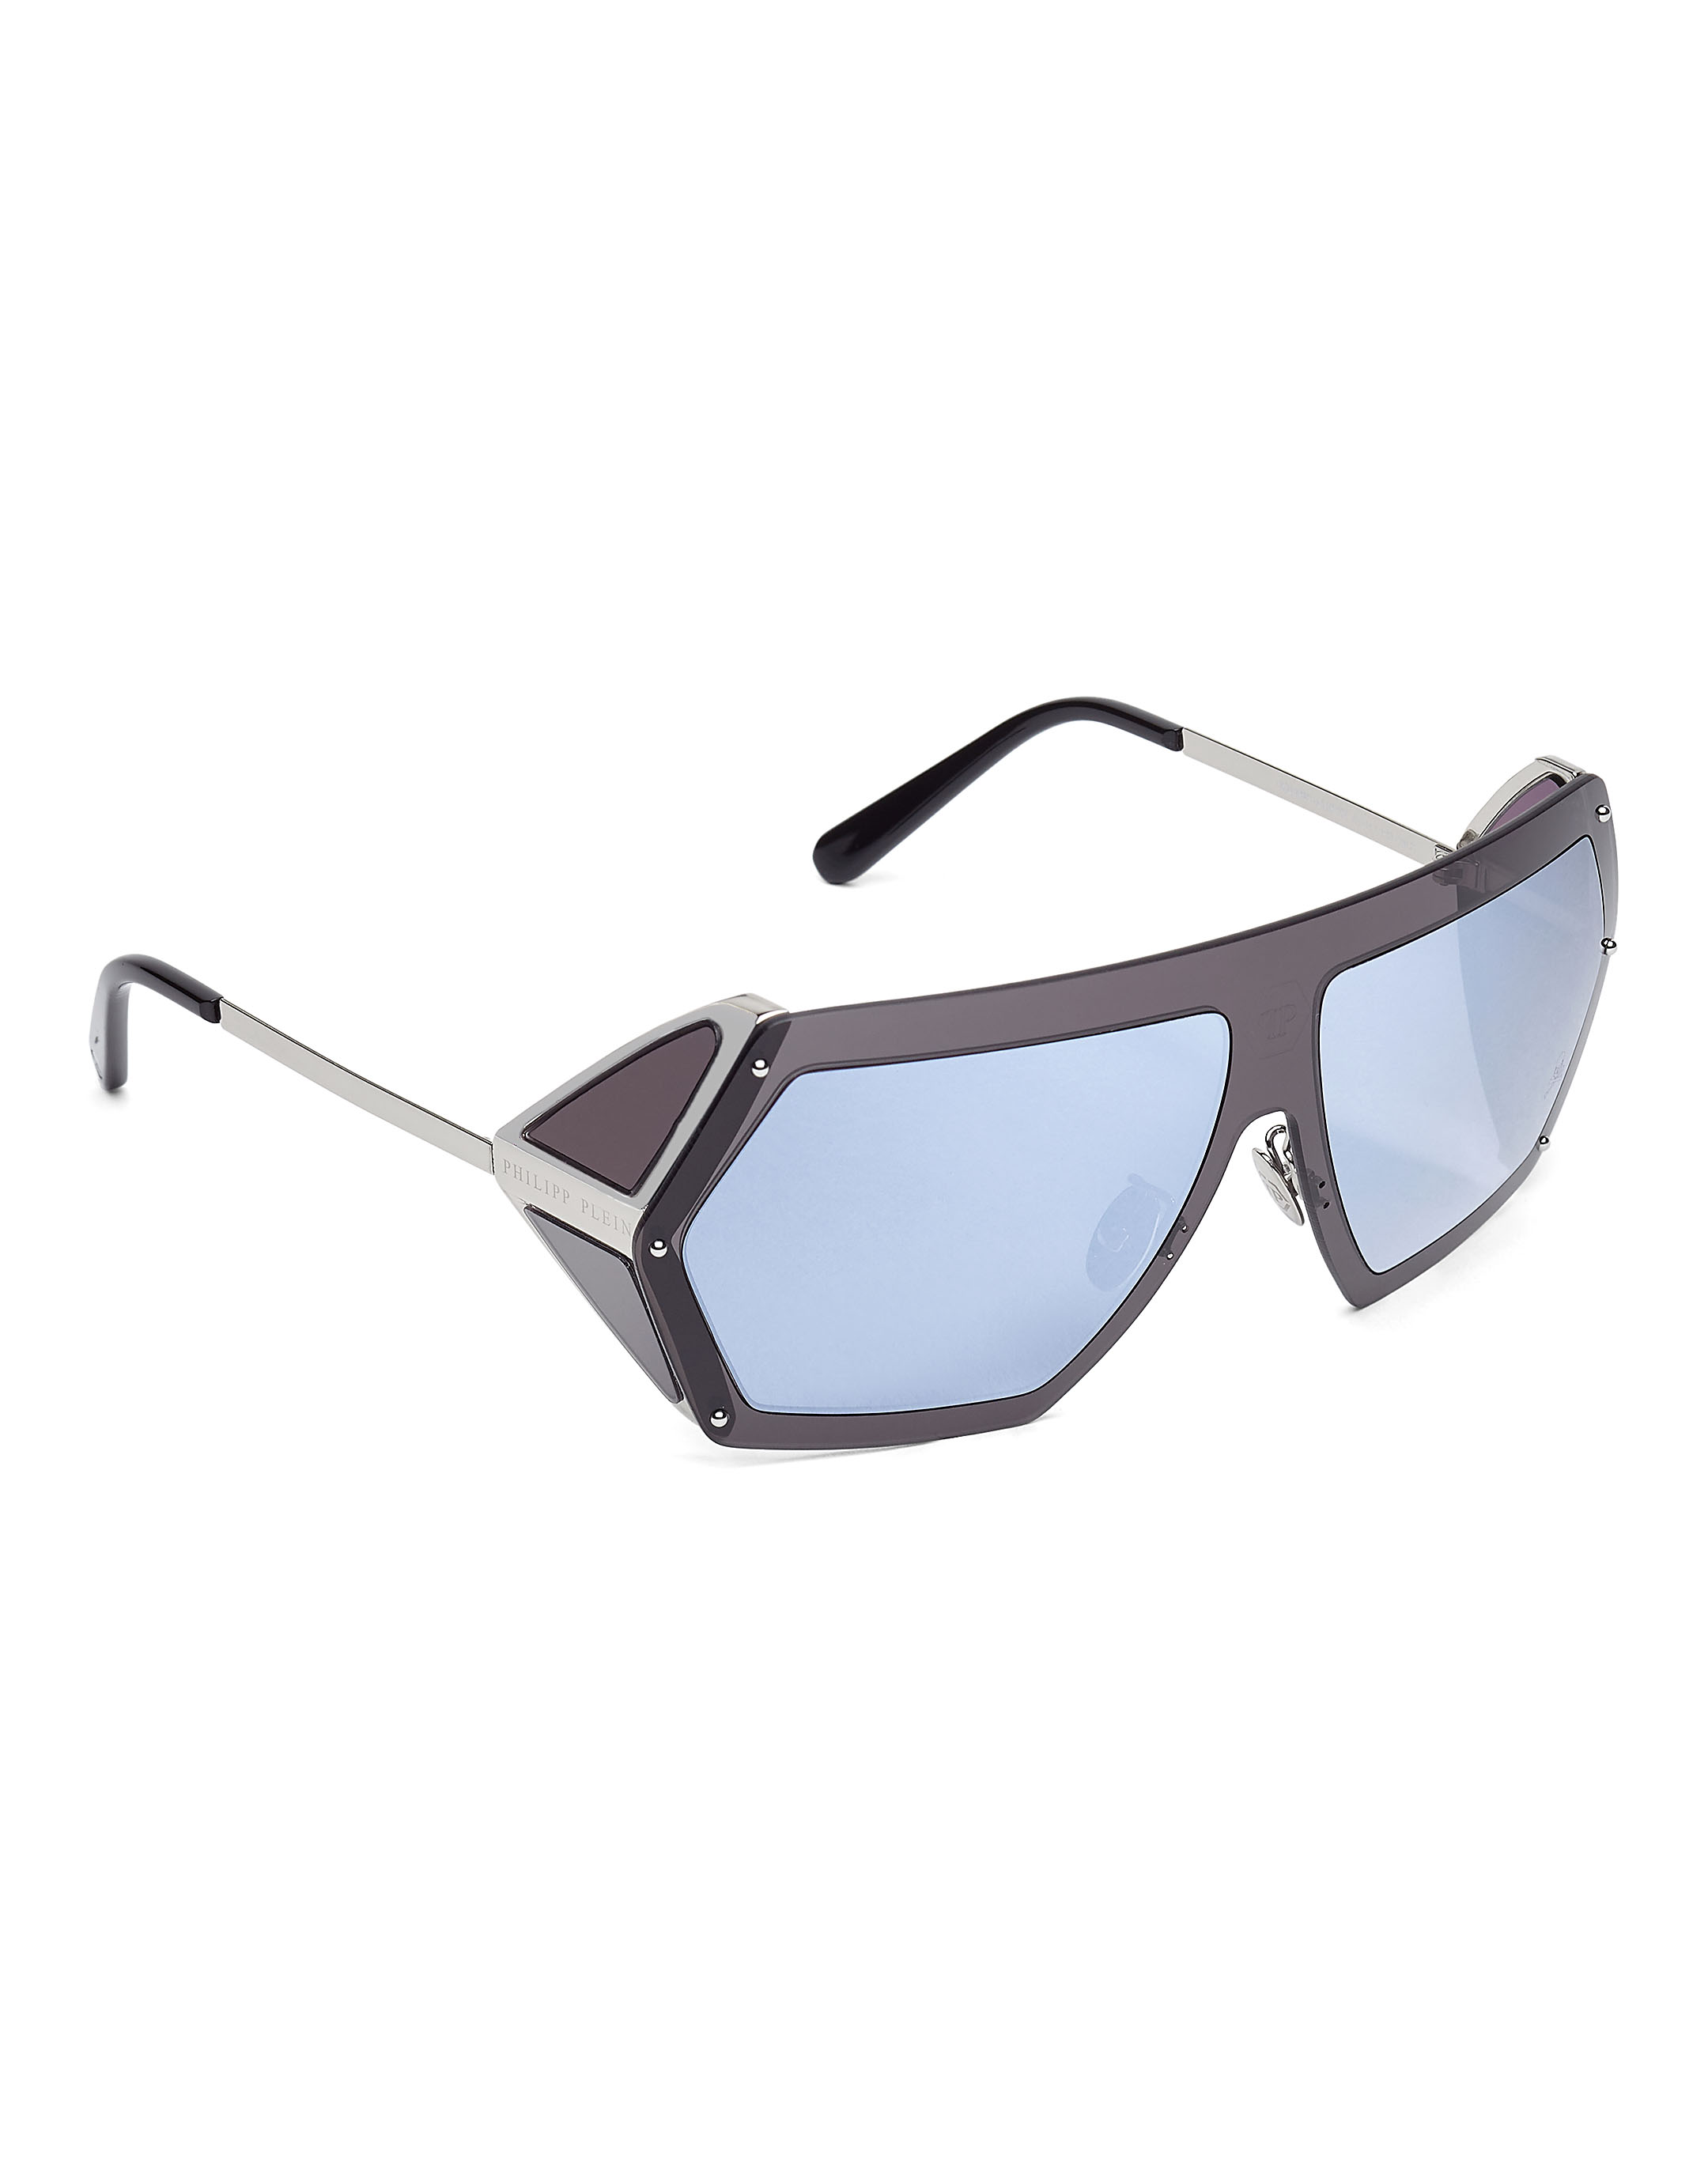 Sunglasses | Outlet